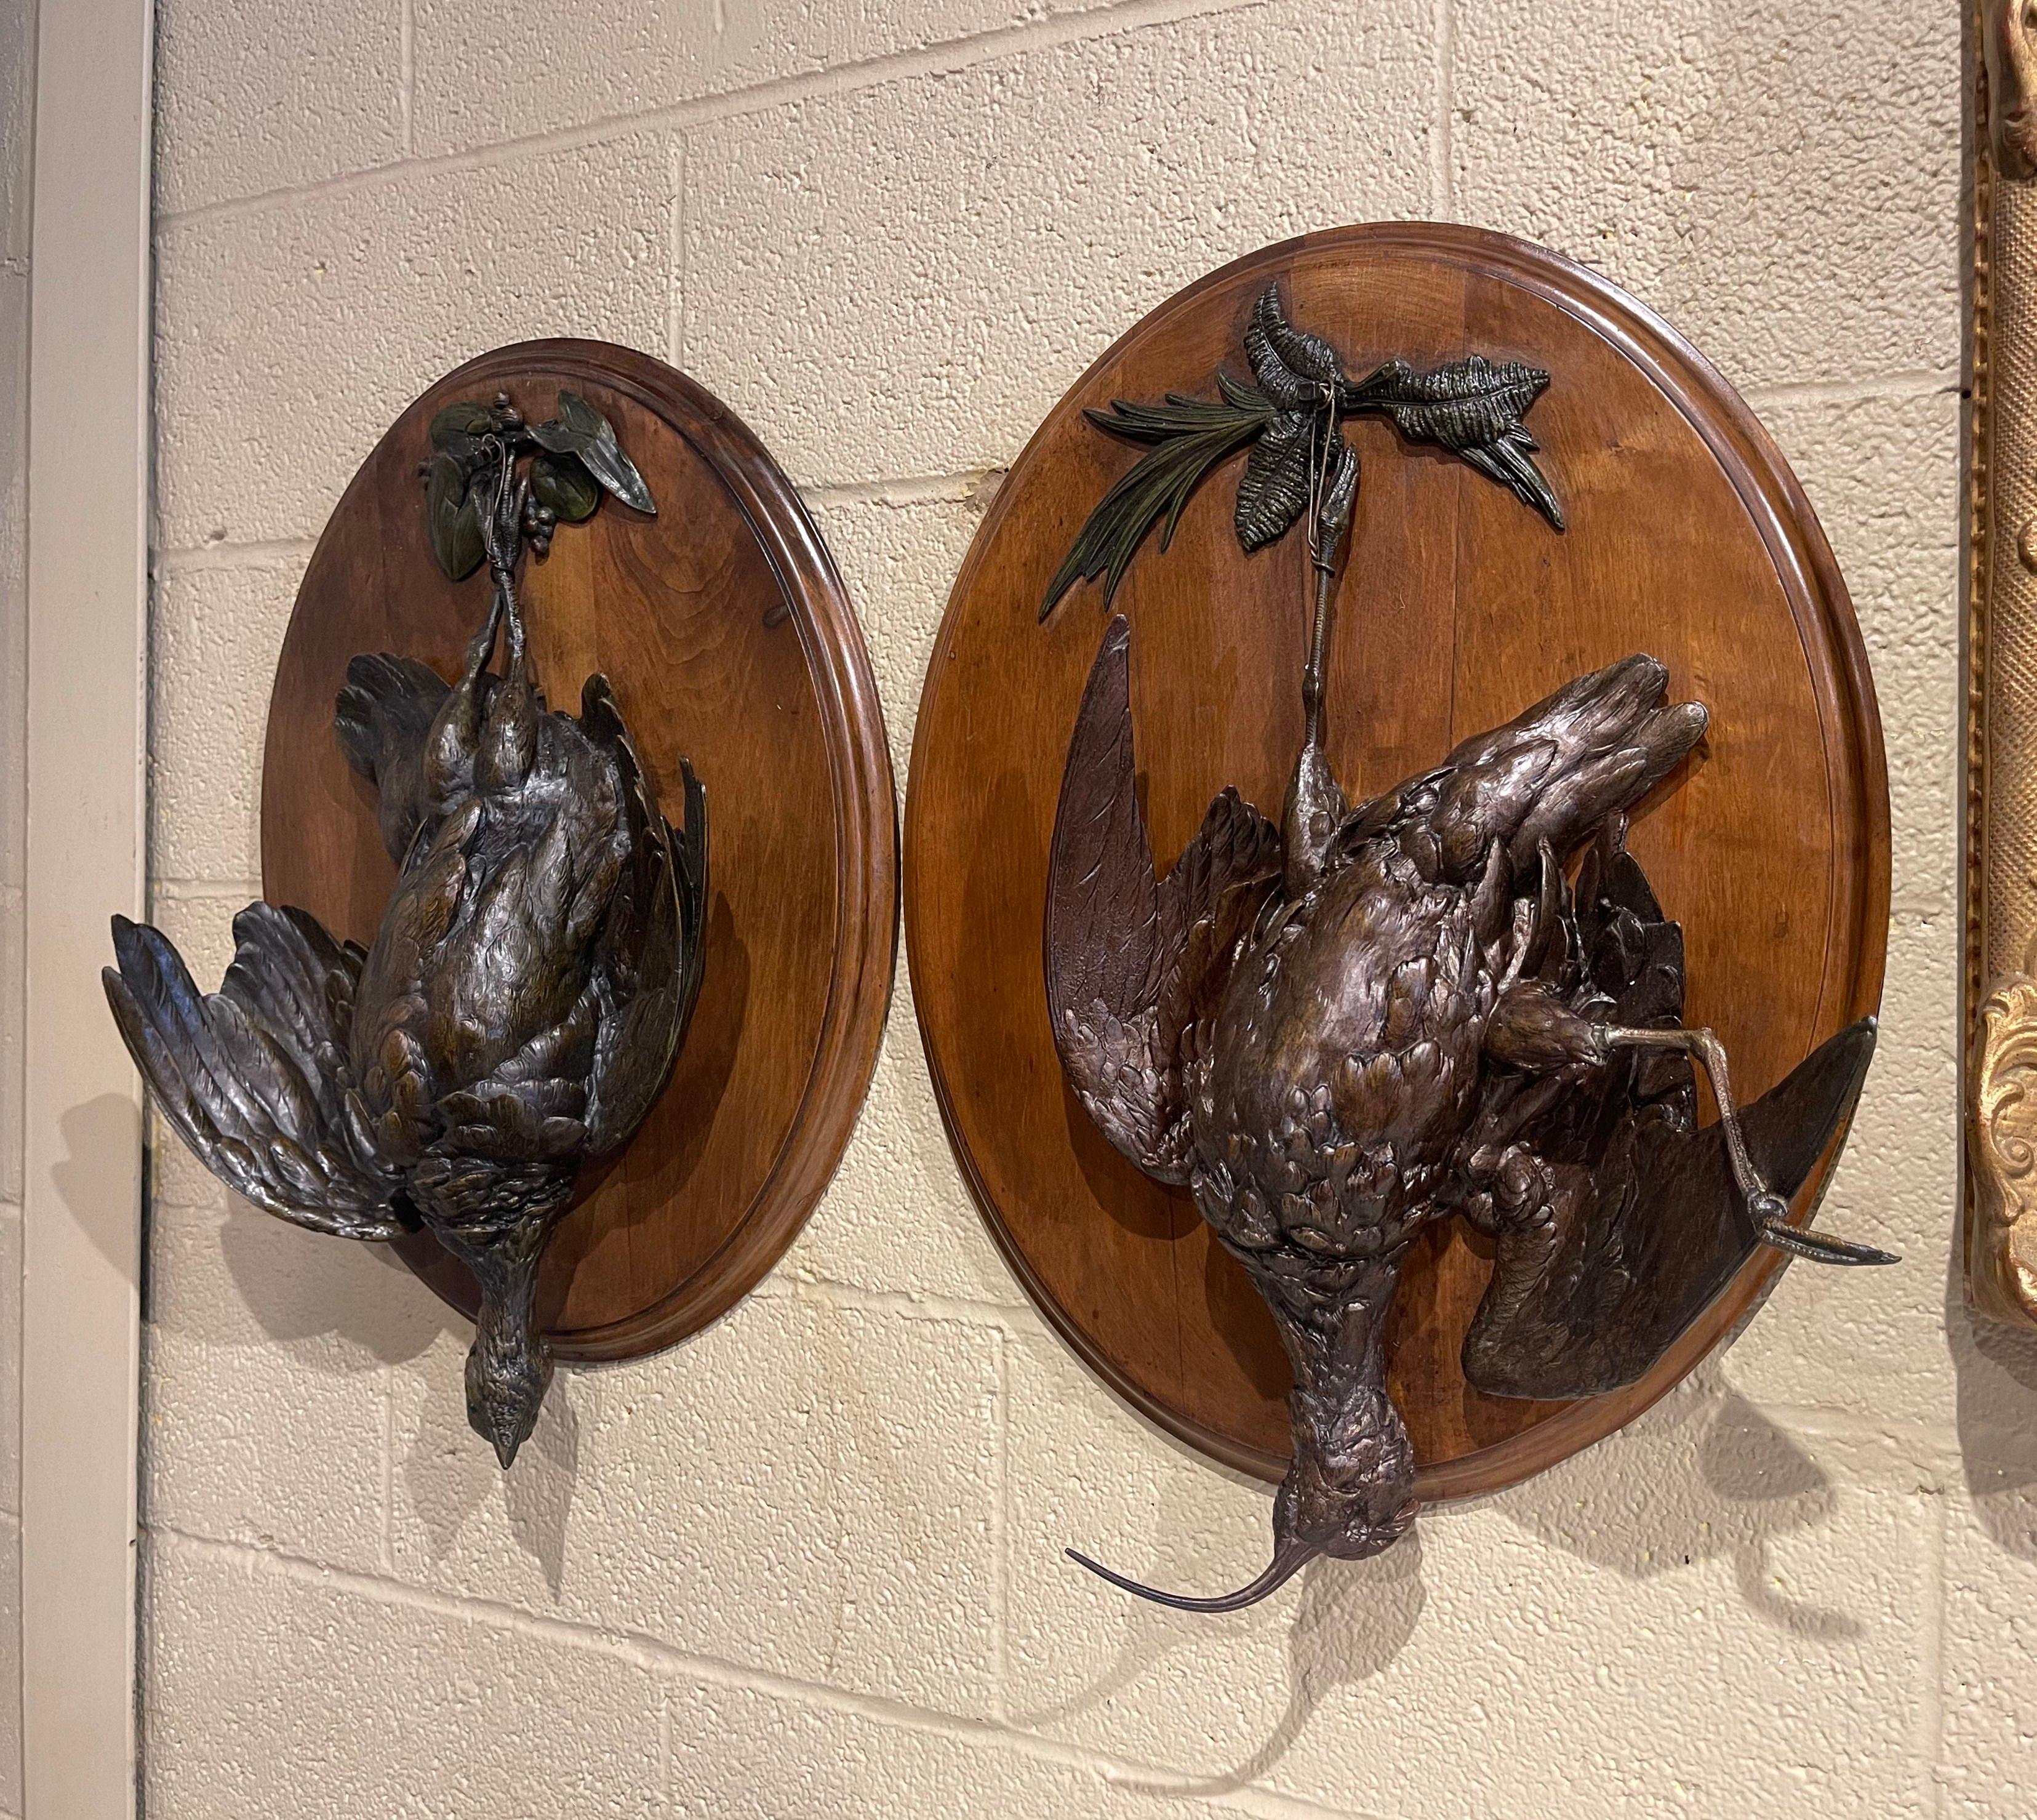 These large antique trophy plaques were created in France, circa 1880. Set on carved oval walnut boards, each wall hanging decor feature a detailed carved bird in high relief, tied upside down to foliage embellishments with a rope at the base. The